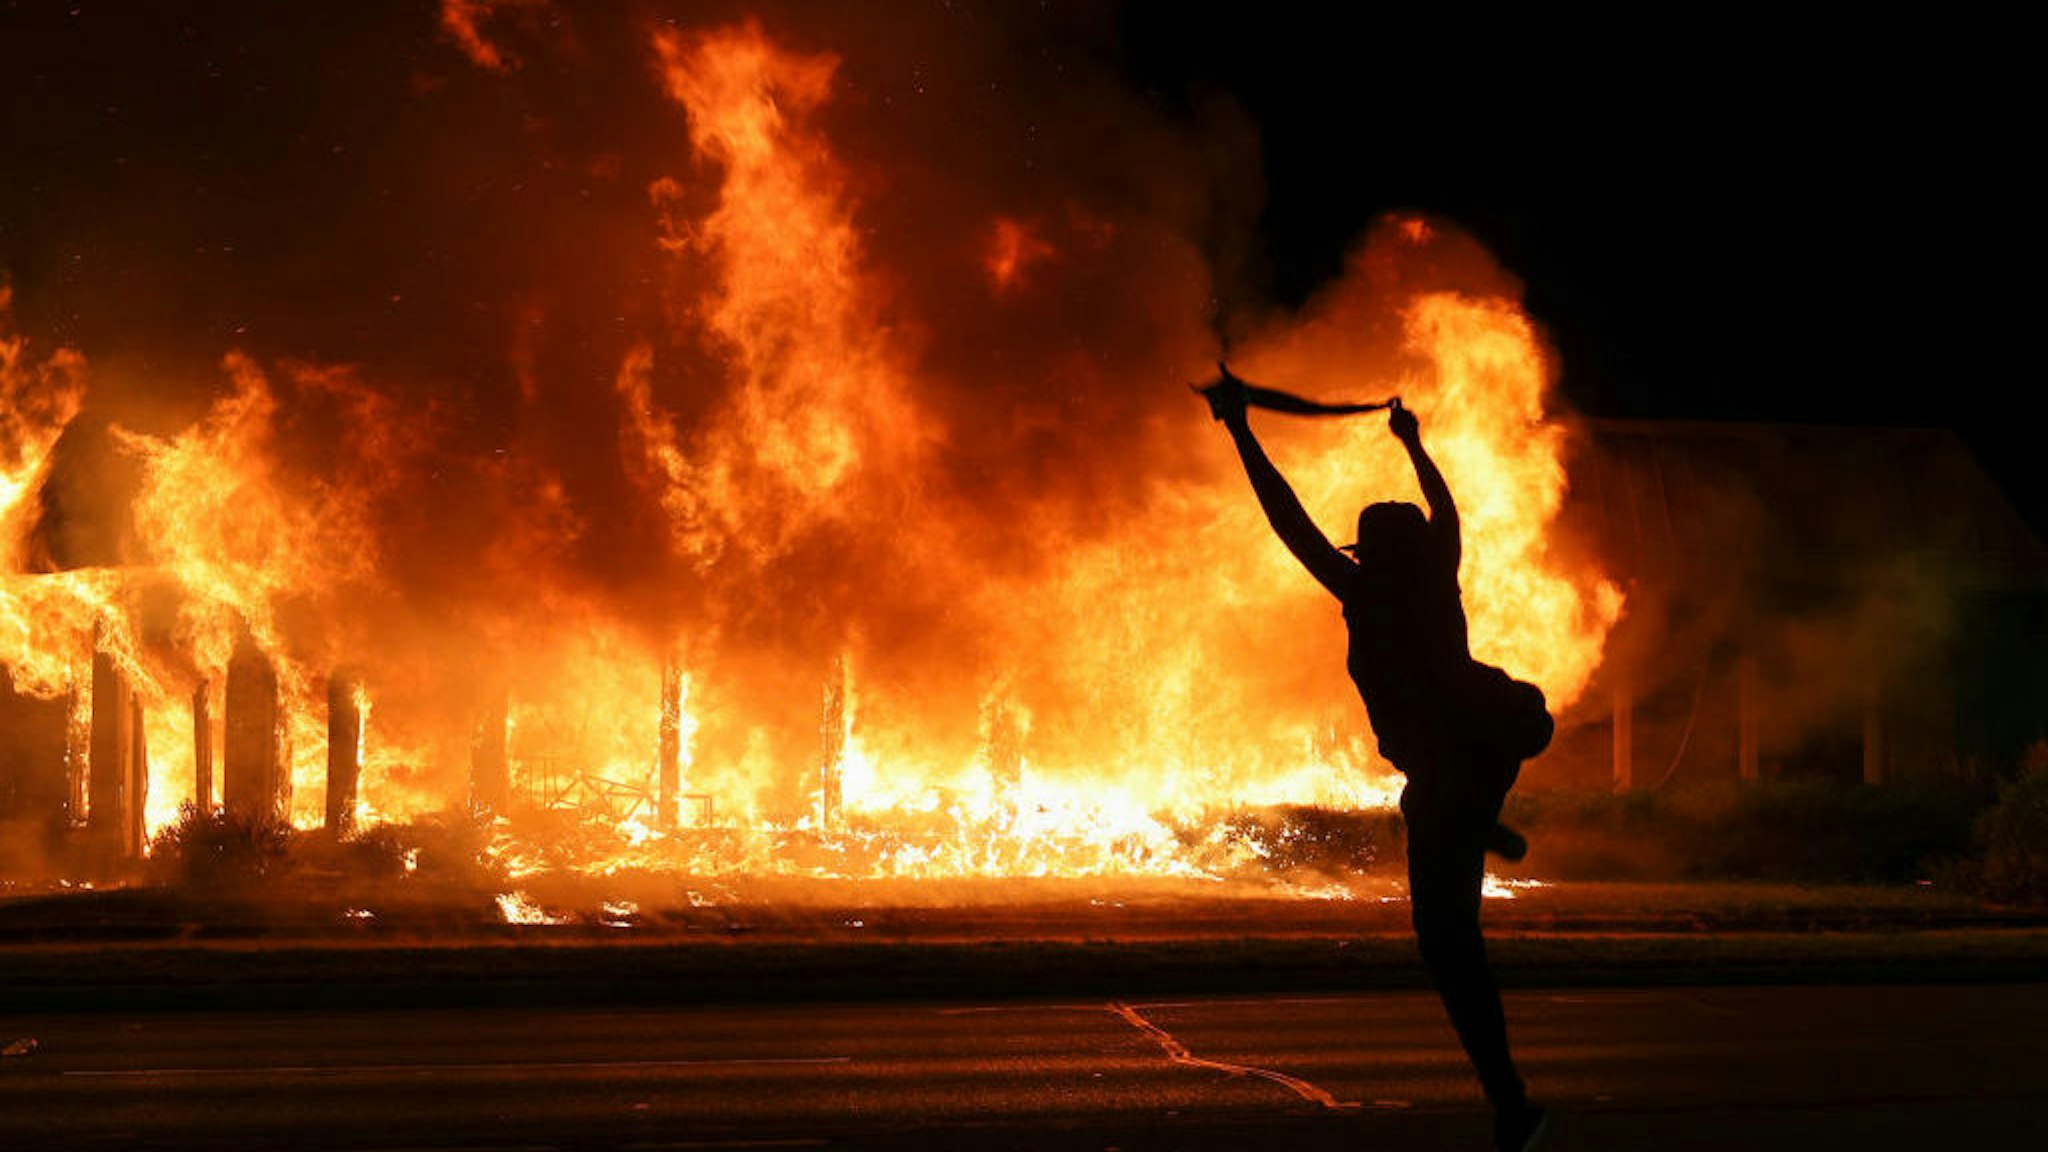 Jacob Blake protesters lit buildings on fire in Kenosha, Wisconsin, United States on August 24, 2020. A police shooting in the US state of Wisconsin sent a Black man into serious condition on Sunday, with the video footage of the incident triggering outrage. (Photo by Tayfun Coskun/Anadolu Agency via Getty Images)